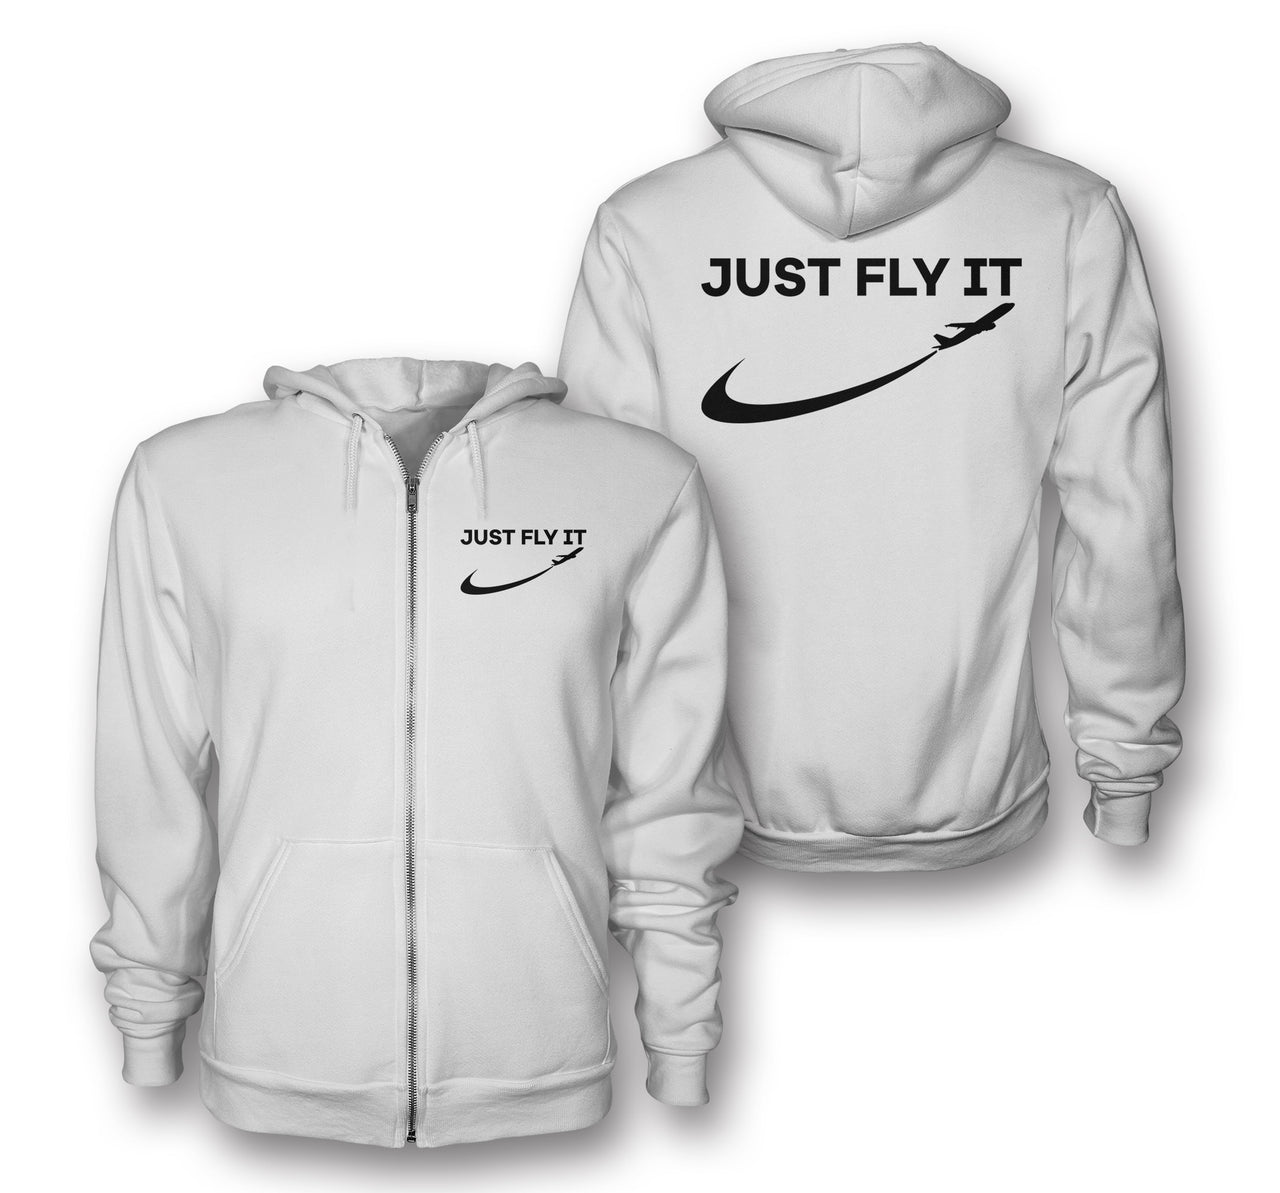 Just Fly It 2 Designed Zipped Hoodies